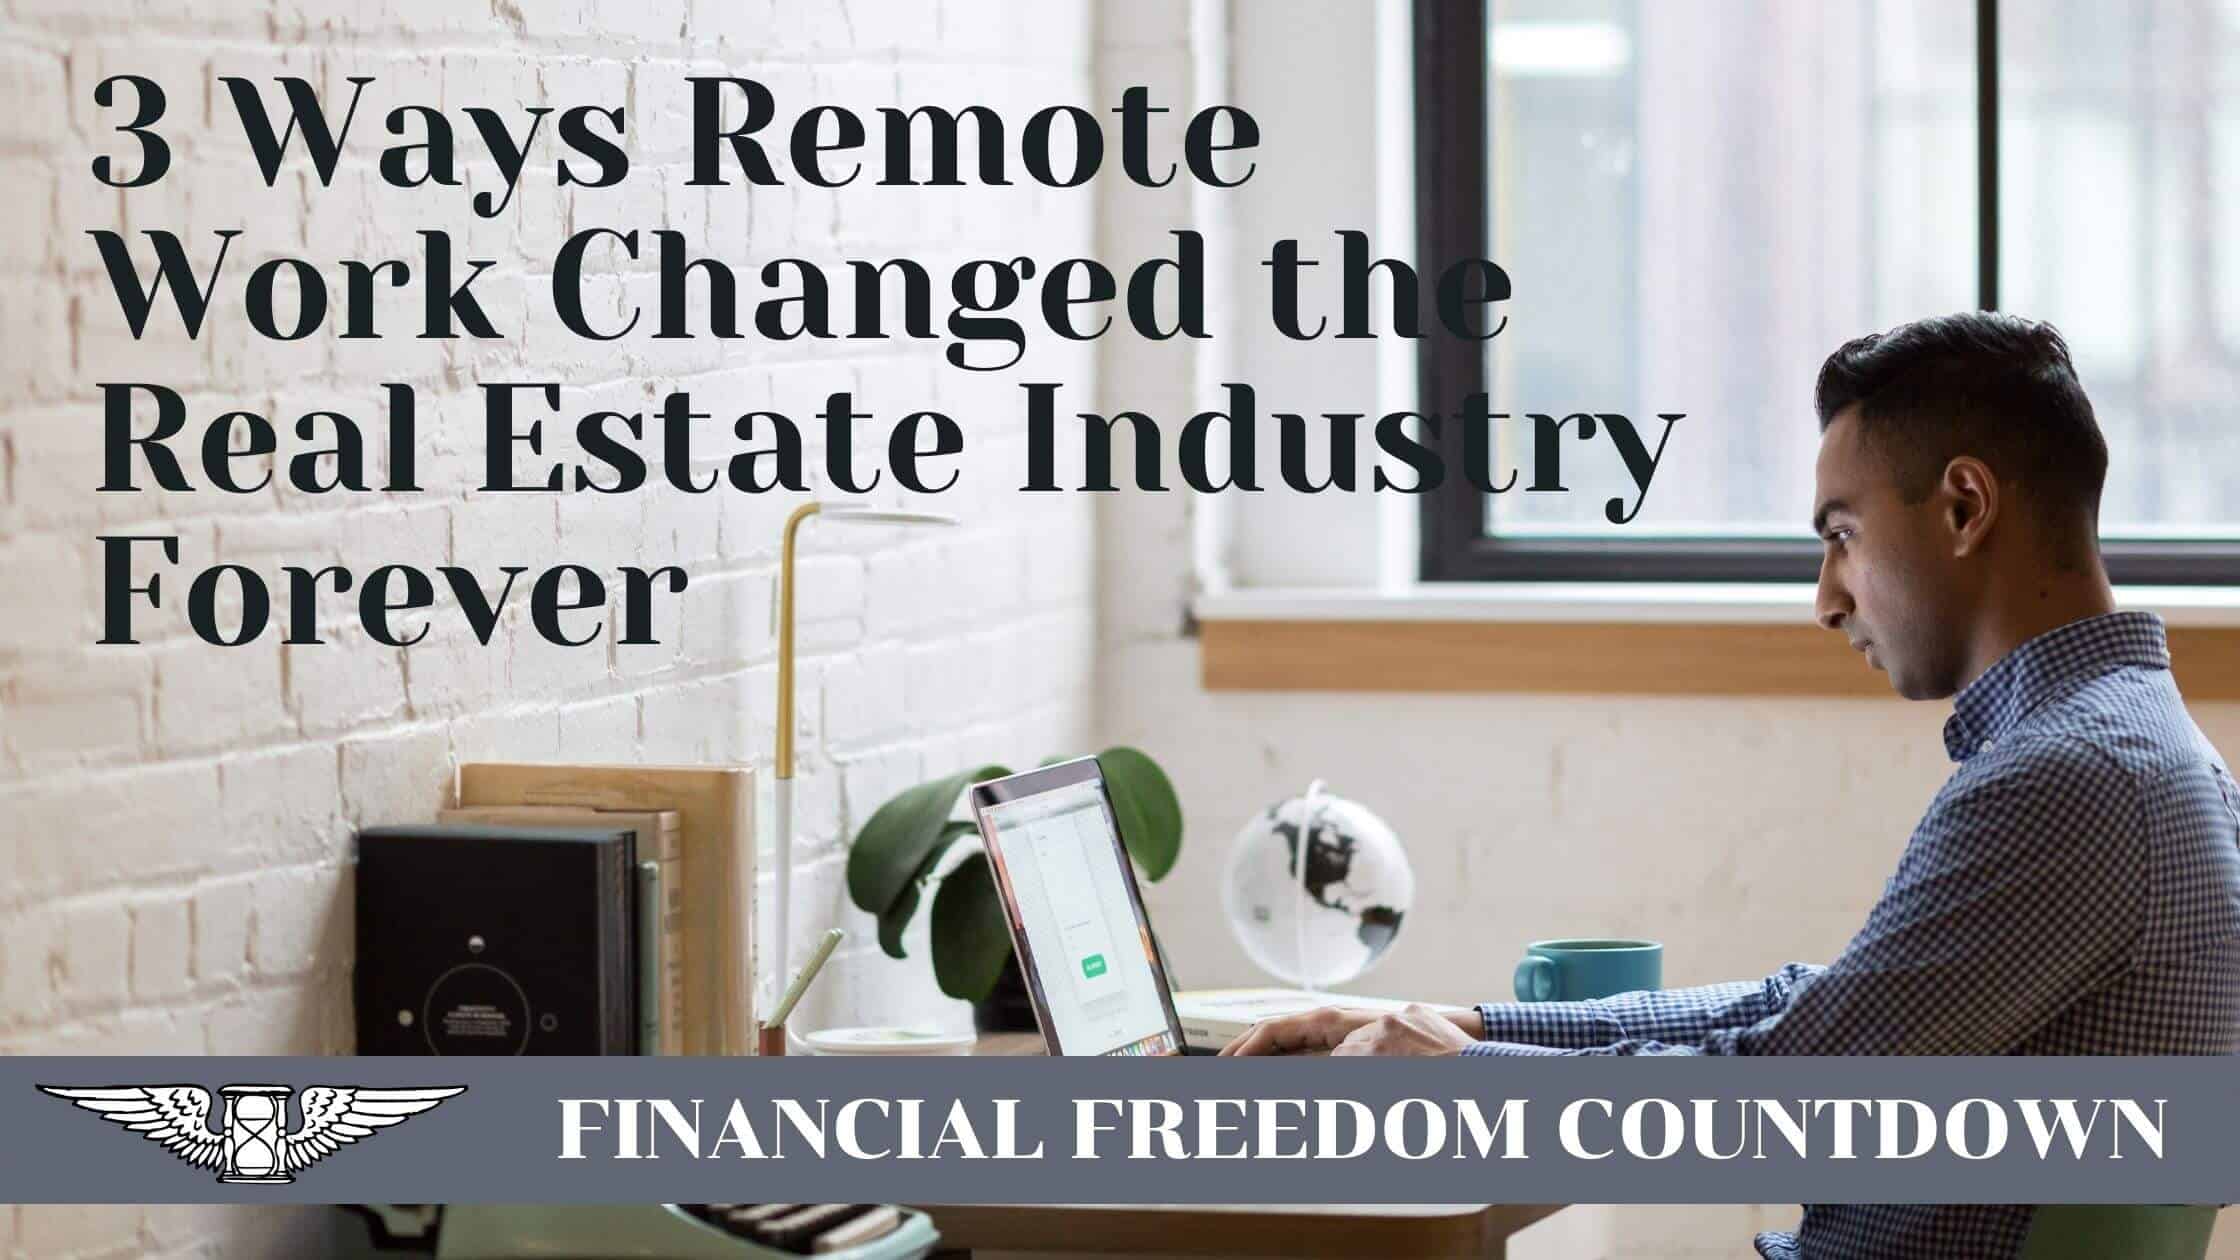 3 Ways Remote Work Changed the Real Estate Industry Forever